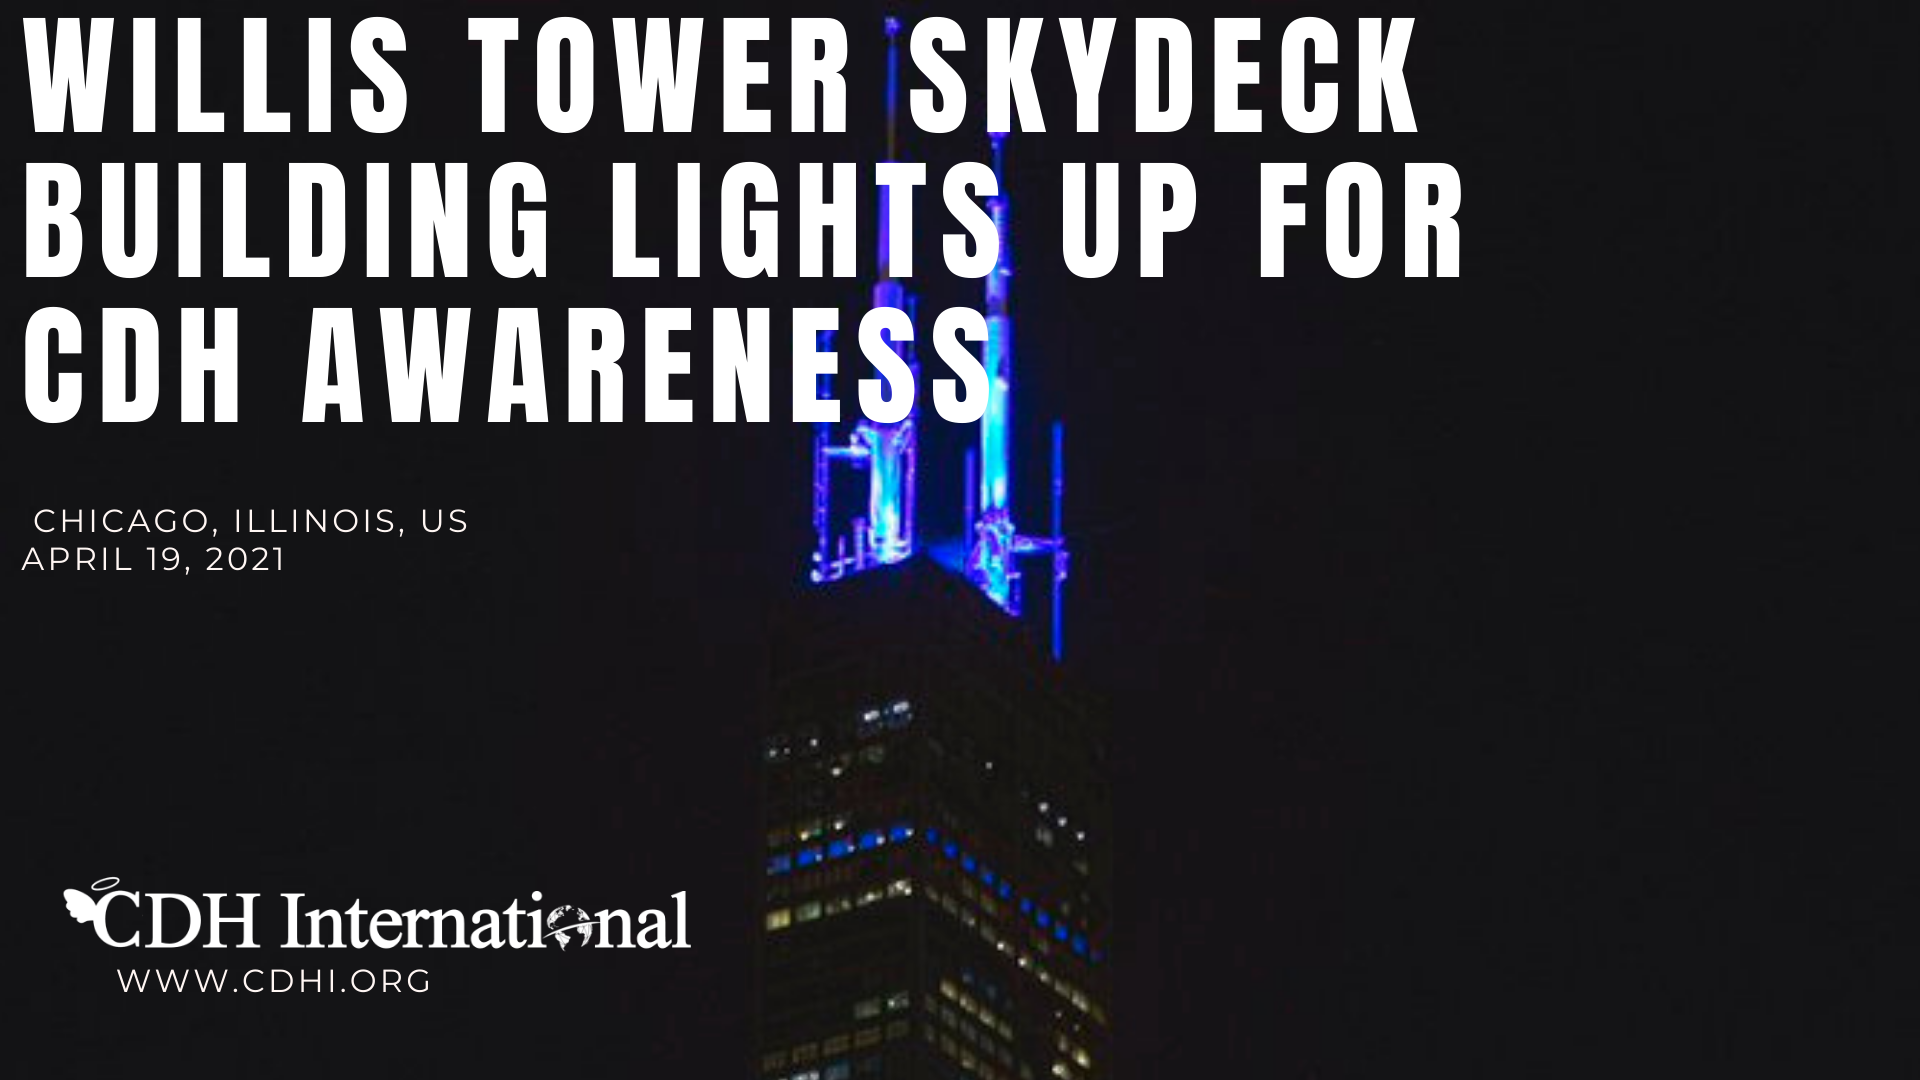 Indiana Power and Light Building Lights Up For CDH Awareness